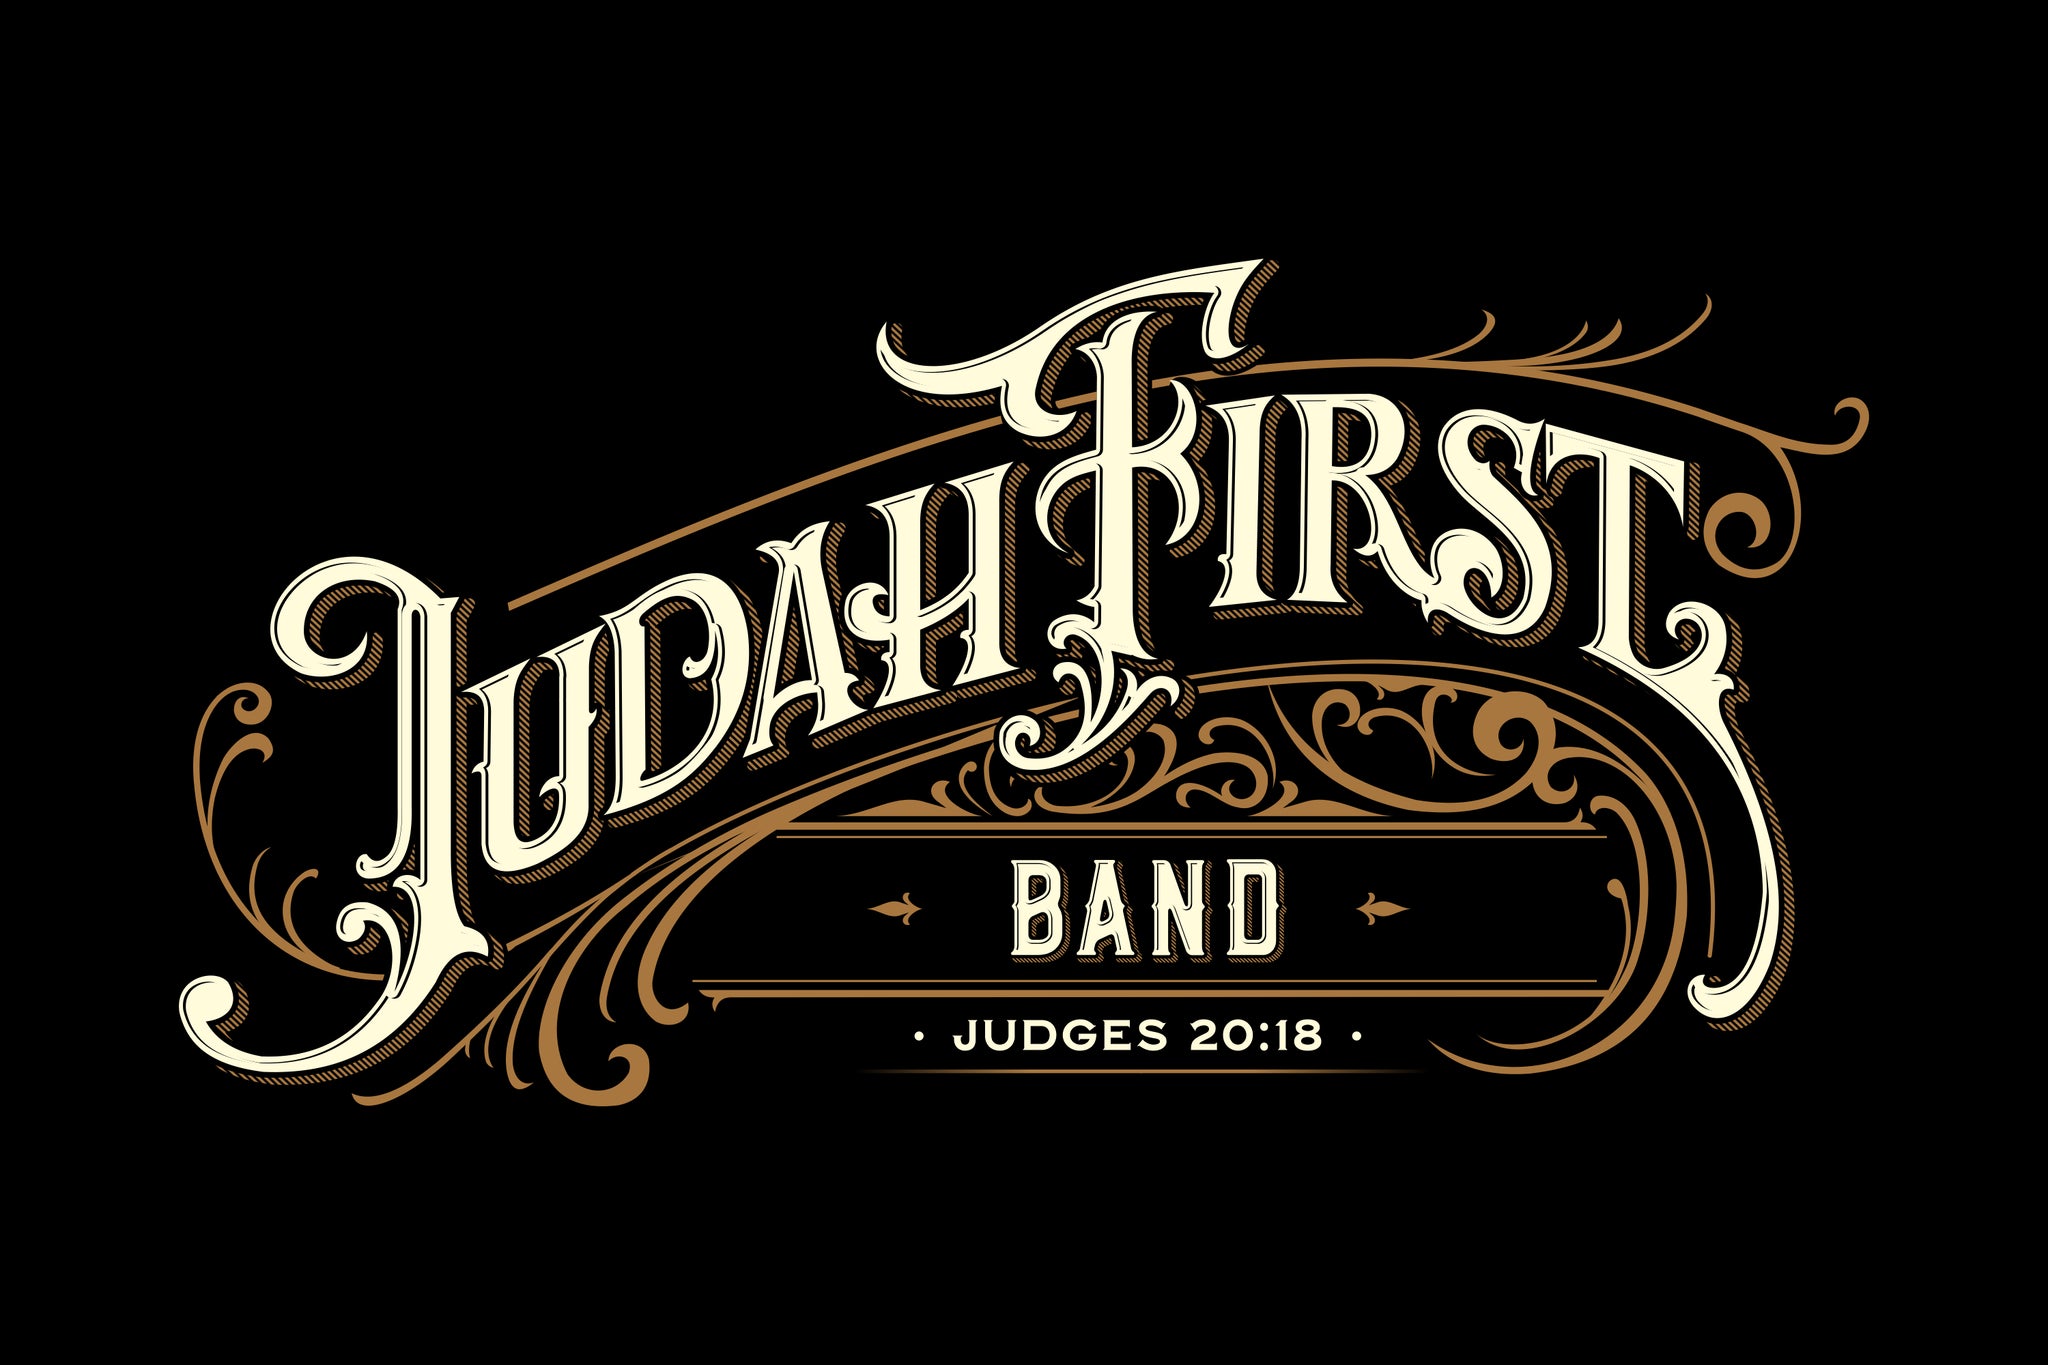 "Your Identity" by Judah First Band (Mp3)